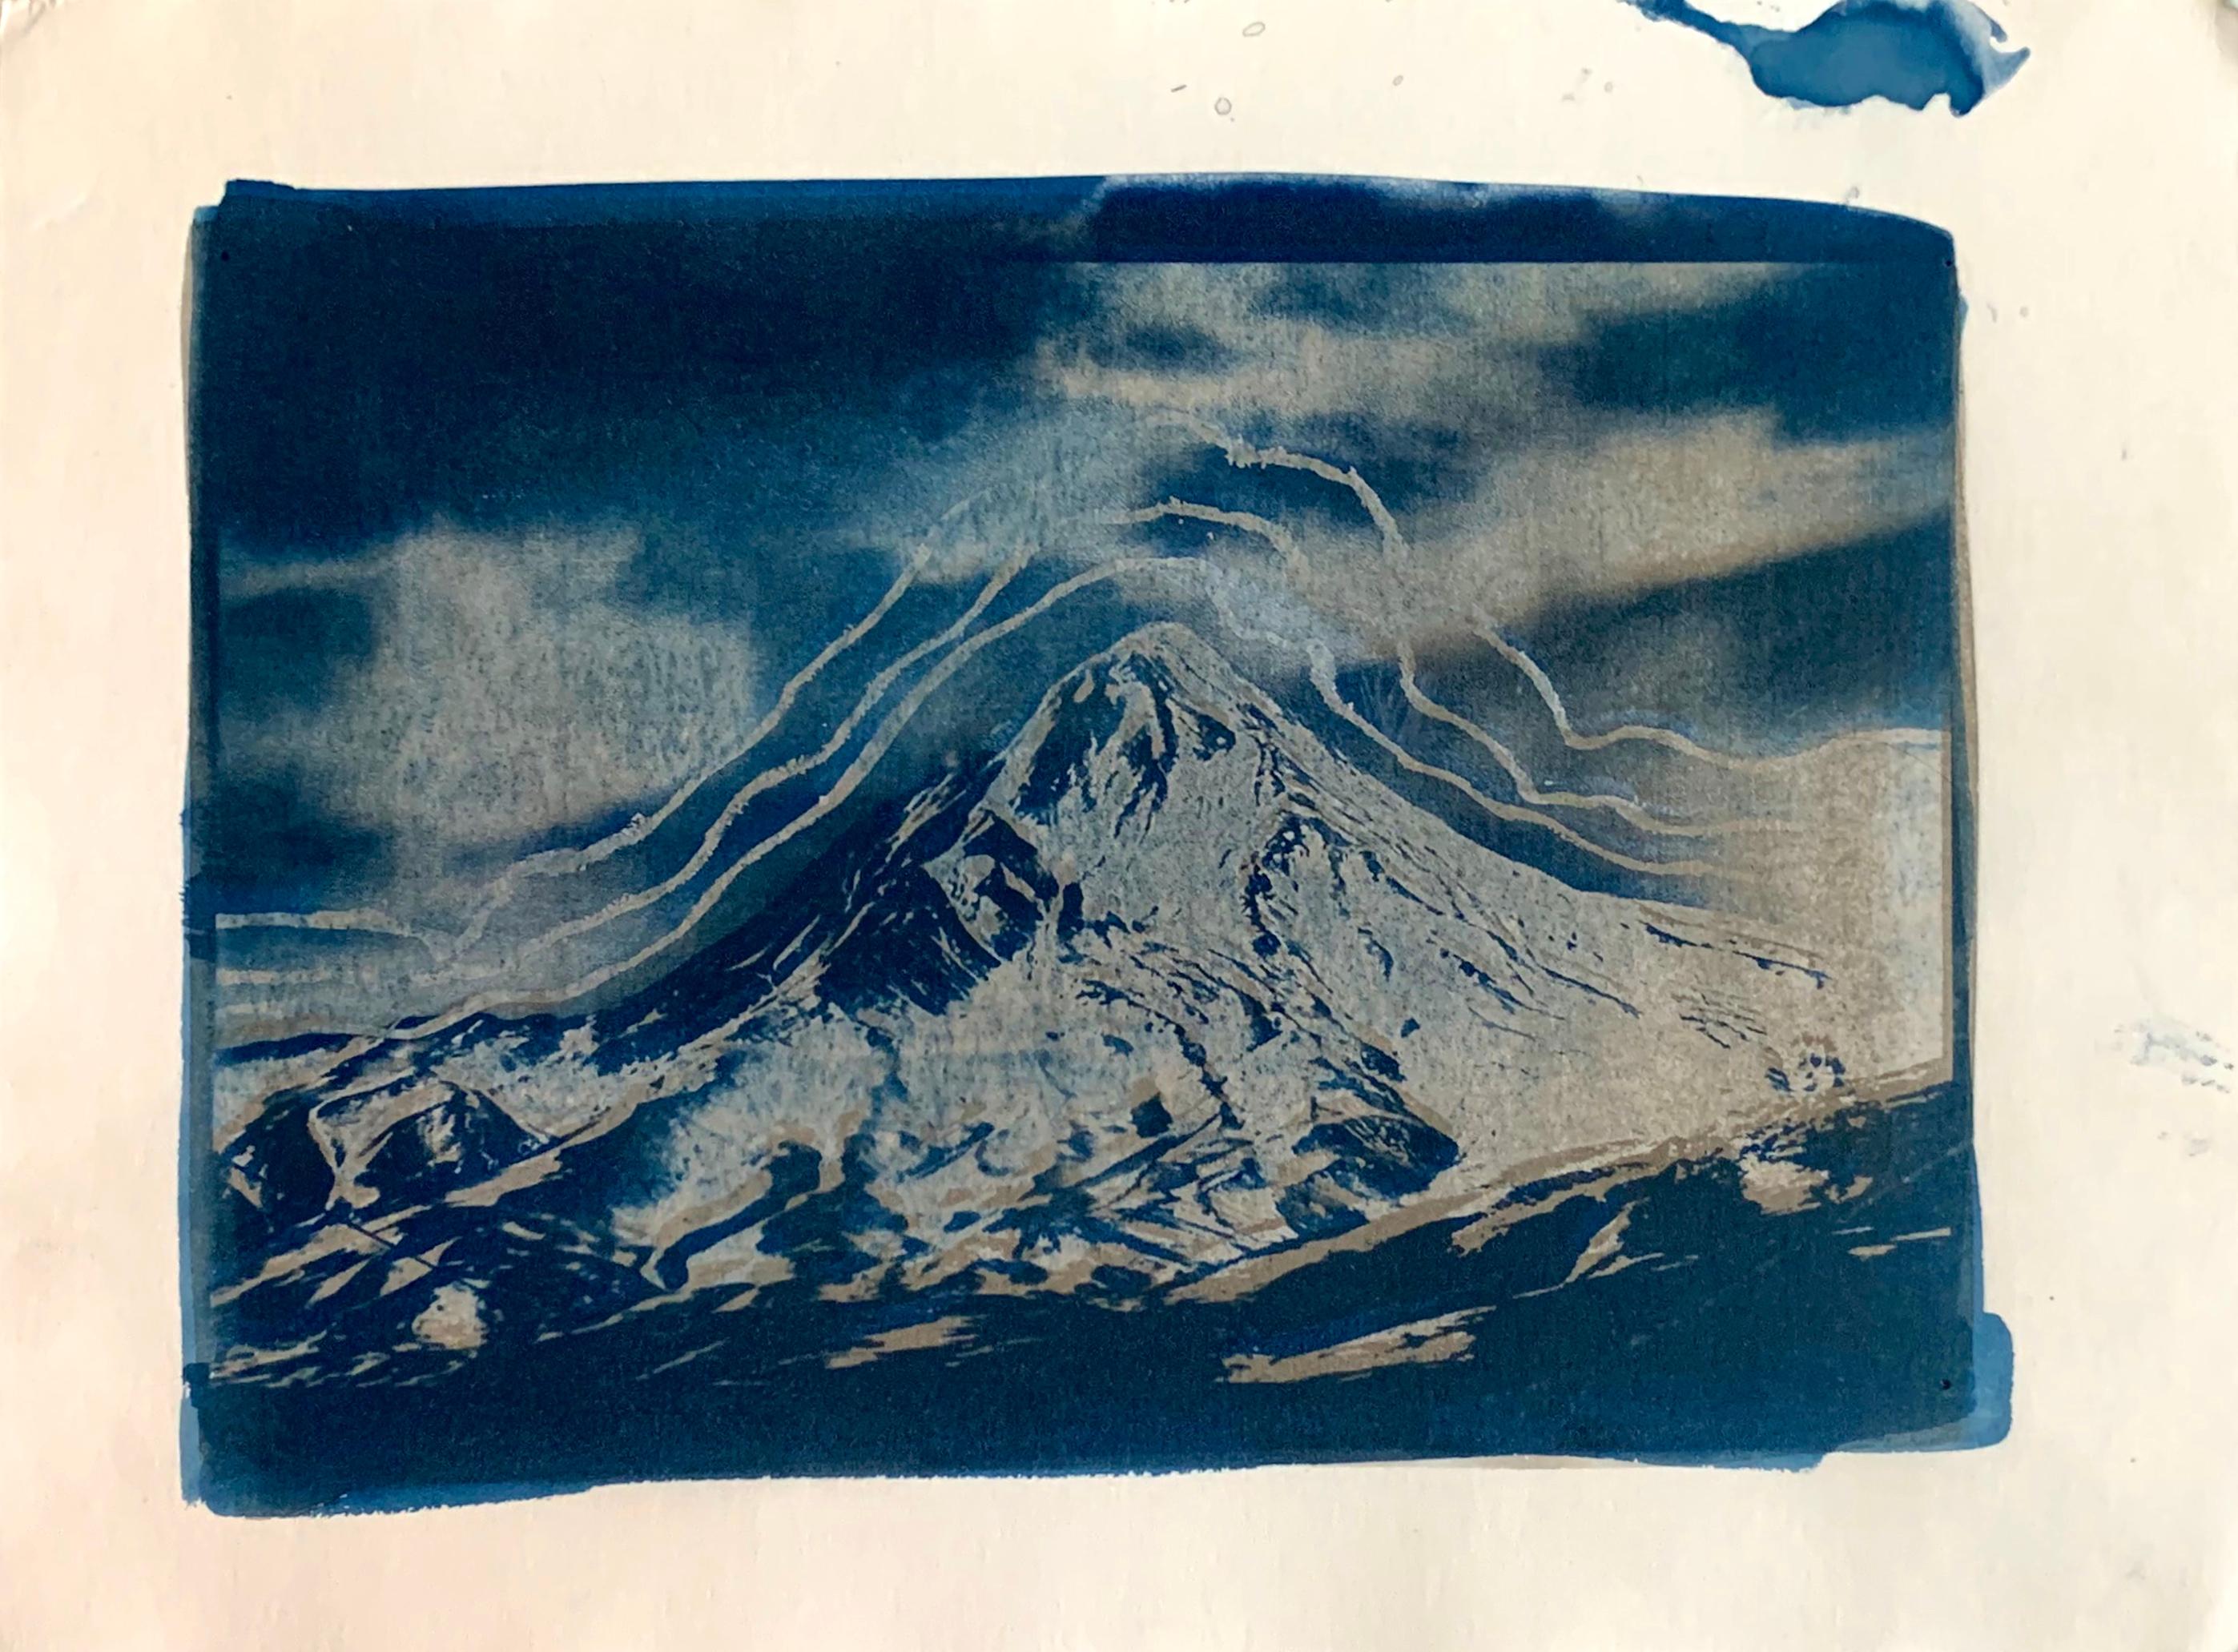 Nazanin Noroozi Figurative Painting - Mount Damavand, navy blue watercolor painting on paper, mountain